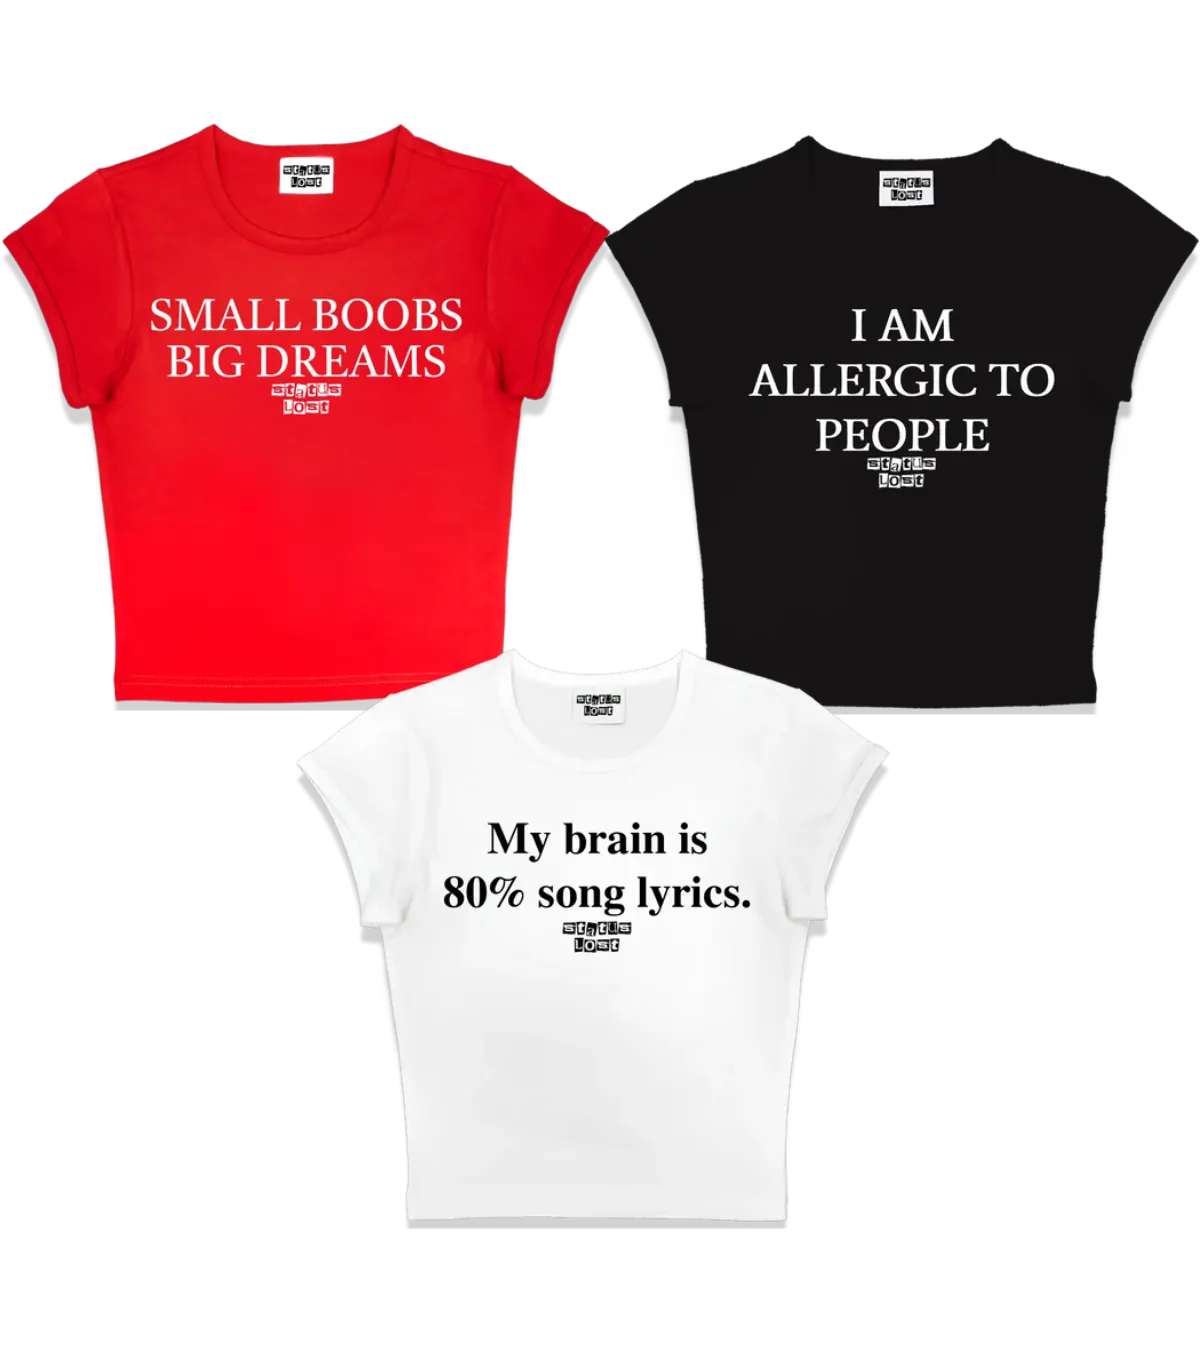 "SMALL BOOBS BIG DREAMS" "I AM ALLERGIC TO PEOPLE" "MY BRAIN IS 80% SONG LYRICS" Matching Trio